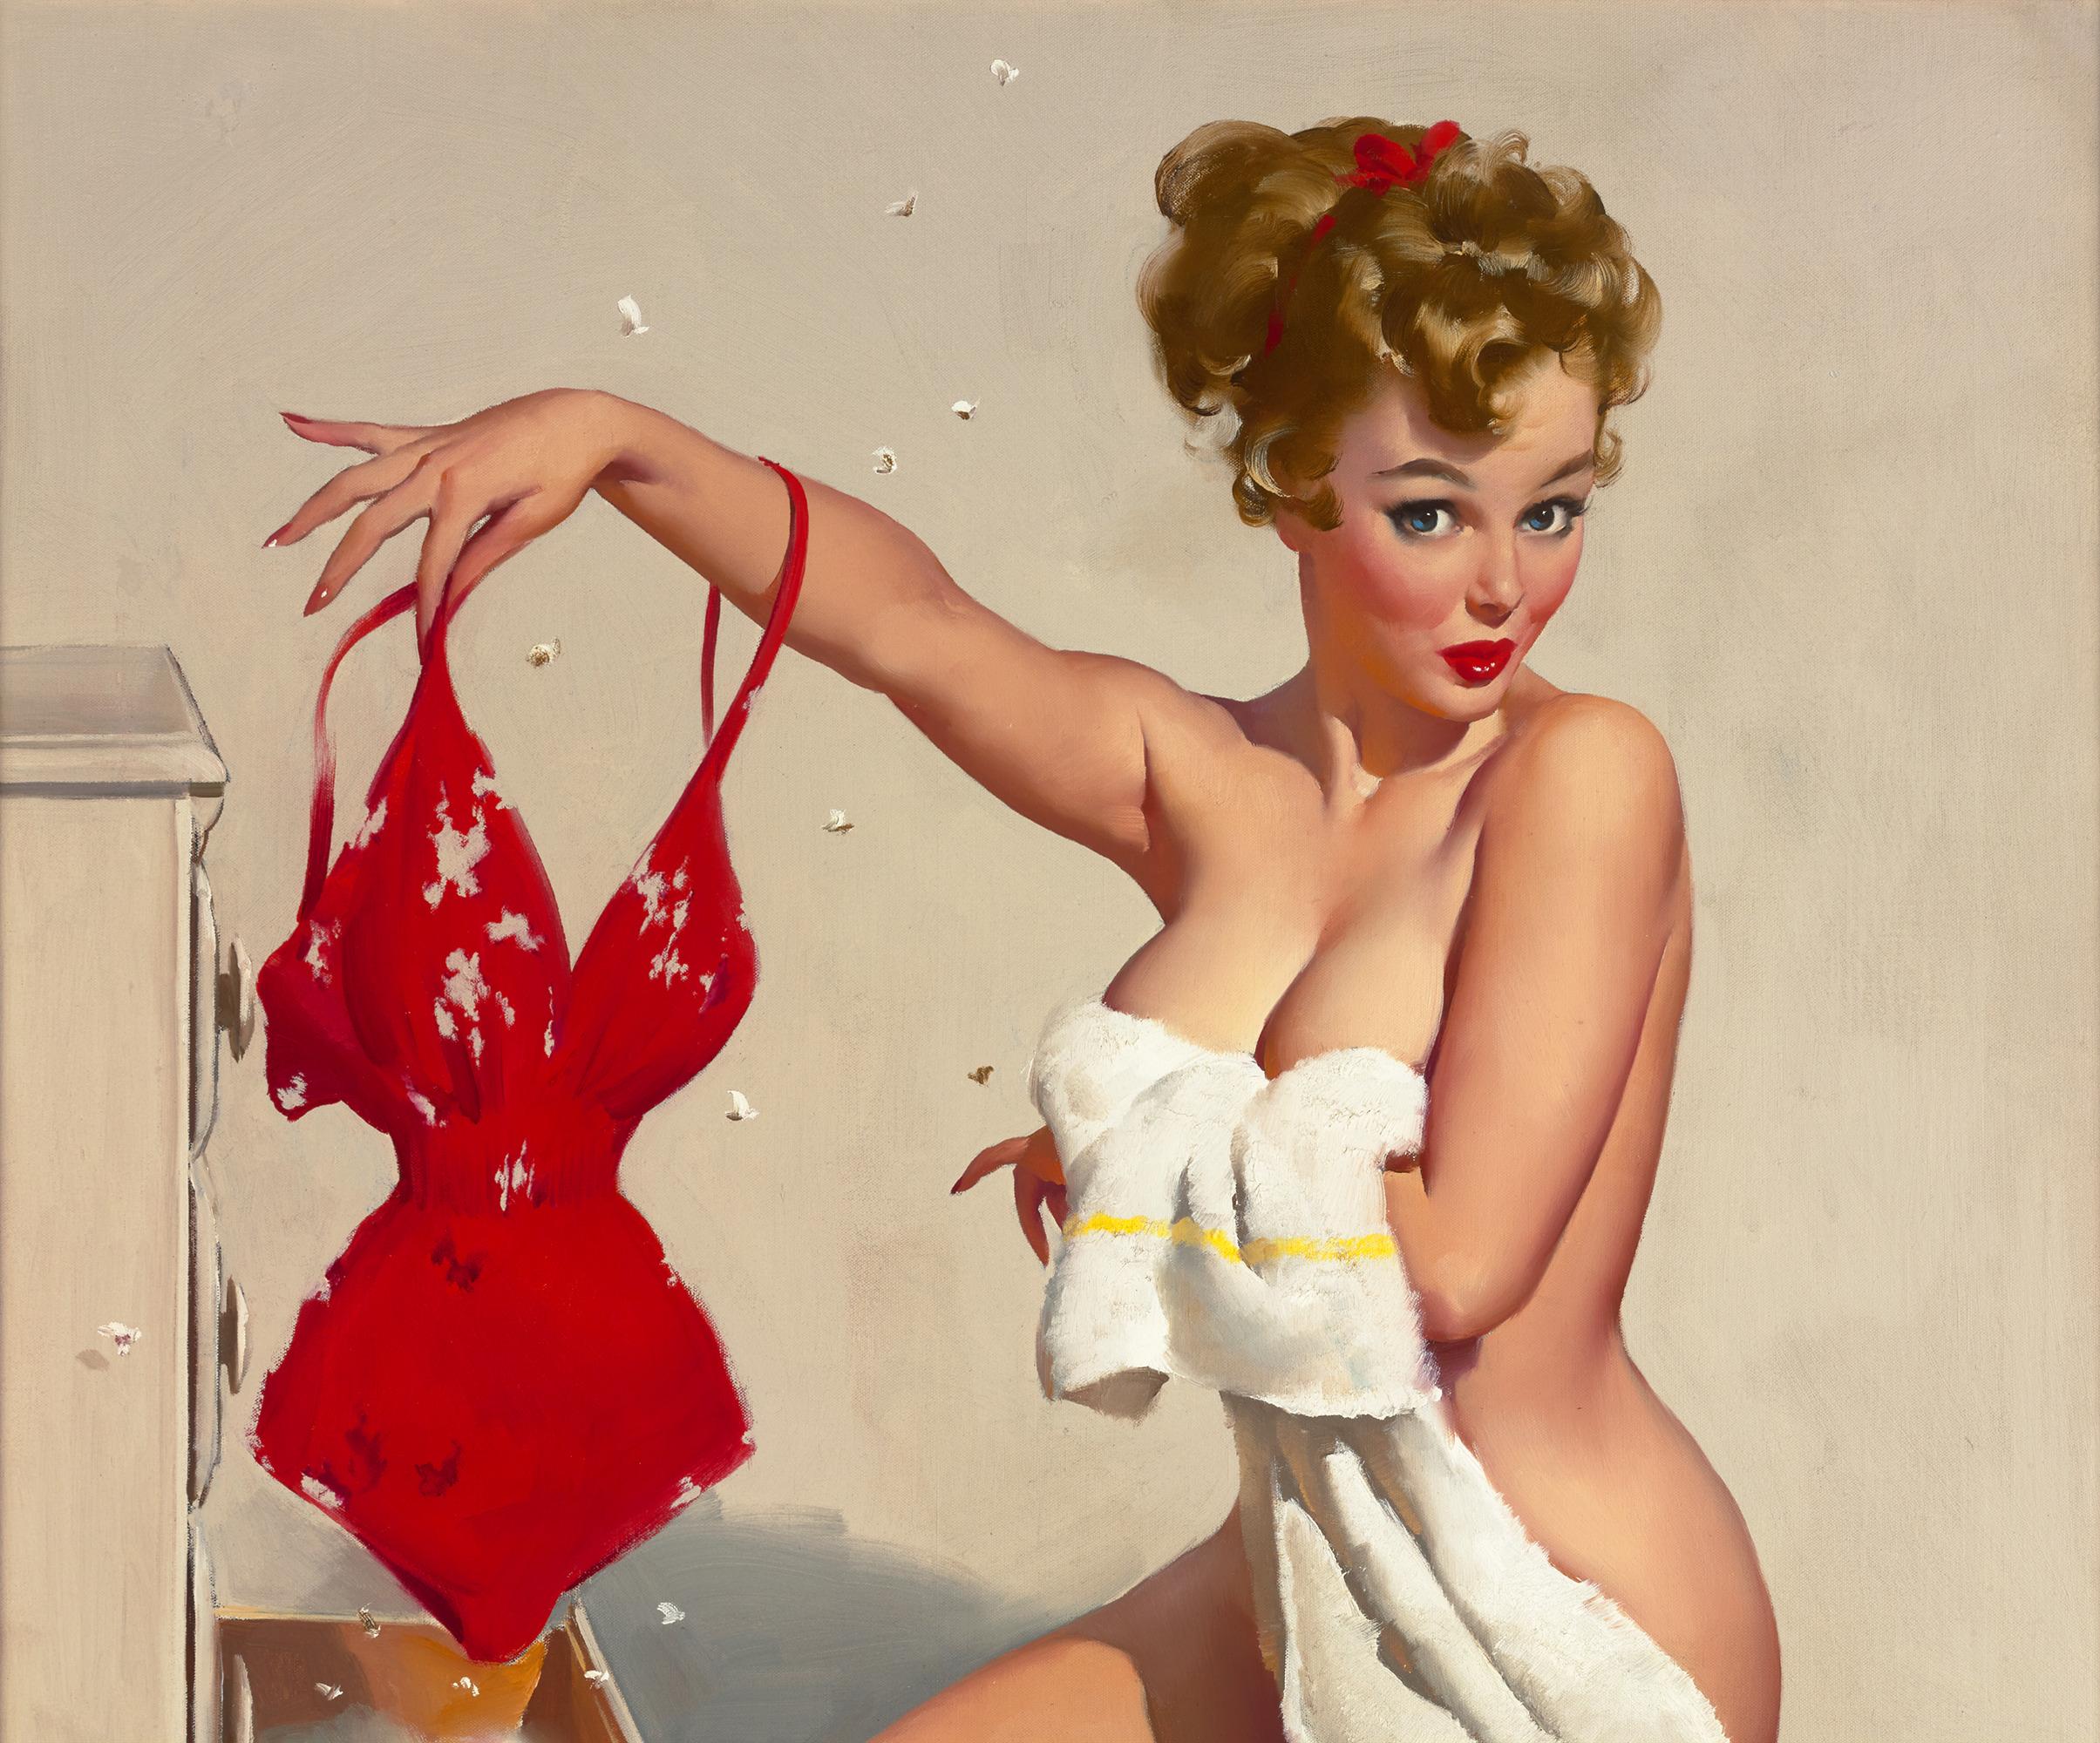 Gil Elvgren
1914-1980  American

Partial Coverage

Signed “Elvgren” (lower right)
Oil on canvas

The iconic illustrations of Gil Elvgren have become an irreplaceable facet of the American artistic landscape. Flirtatious beauties in light-hearted